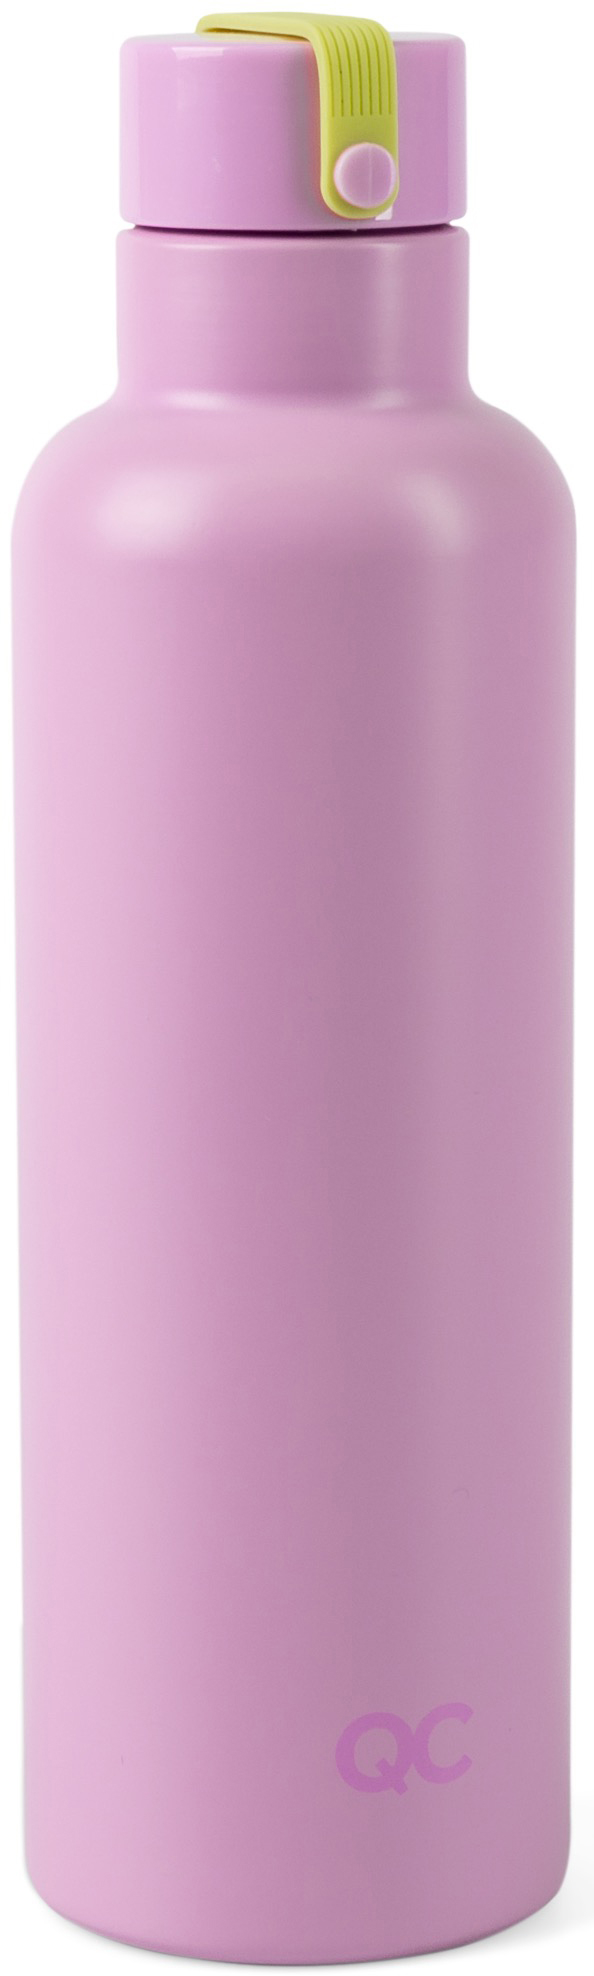 ROOST Thermal bottle 0,5L 7x7x31mm 497598 bubble gum pink/lime